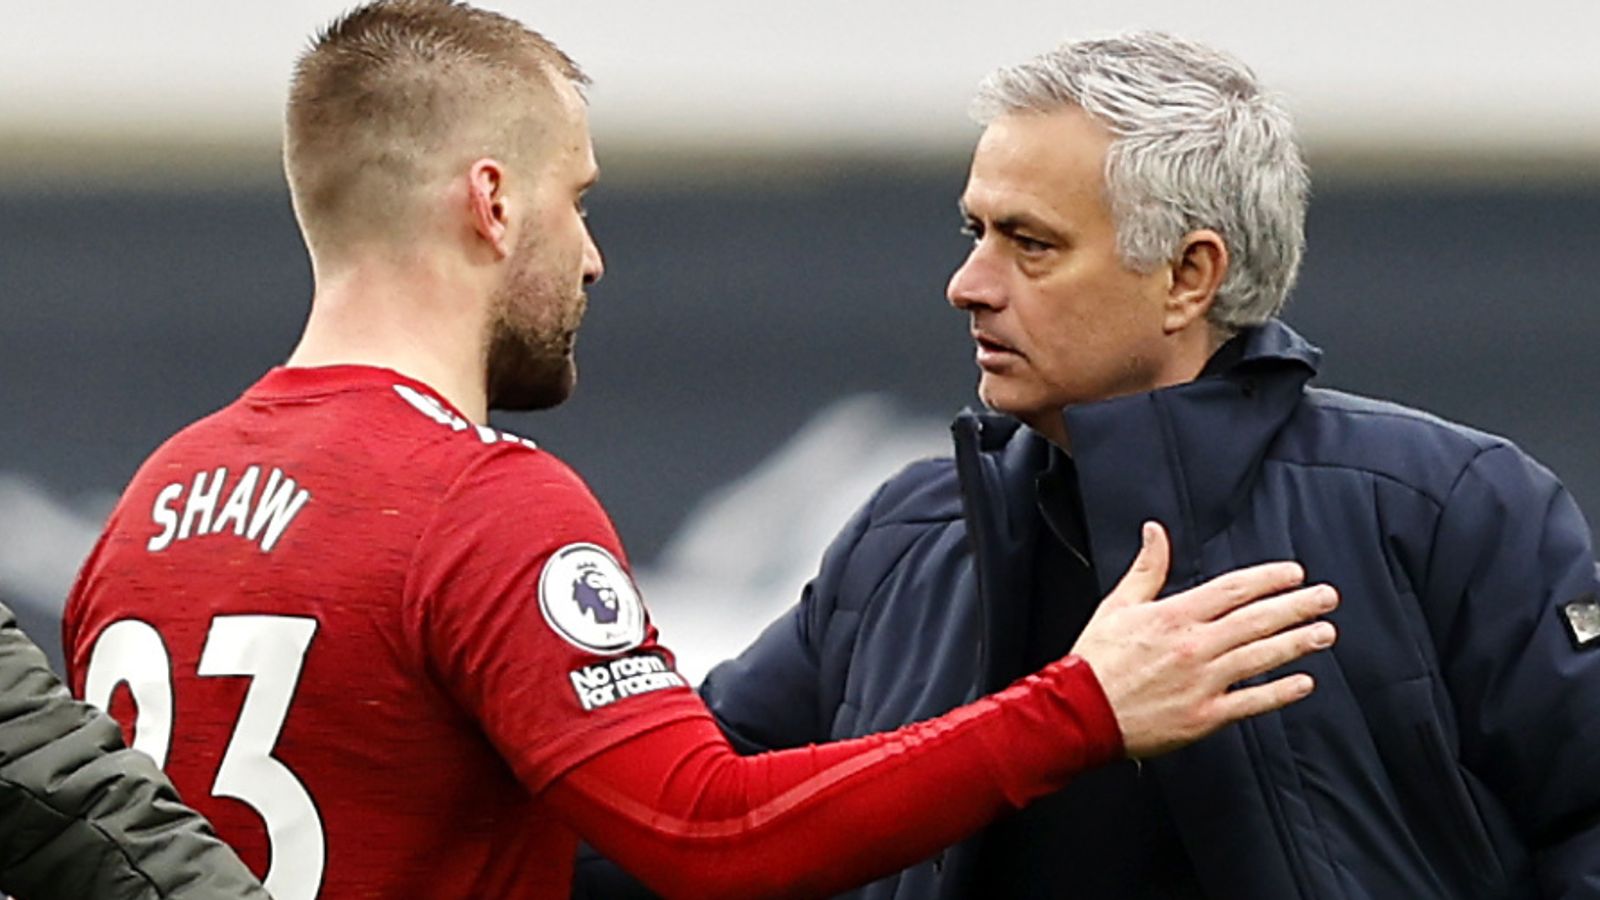 England's Luke Shaw bemused by Jose Mourinho's continued criticism: 'I am trying to move on but he can't' - Bóng Đá